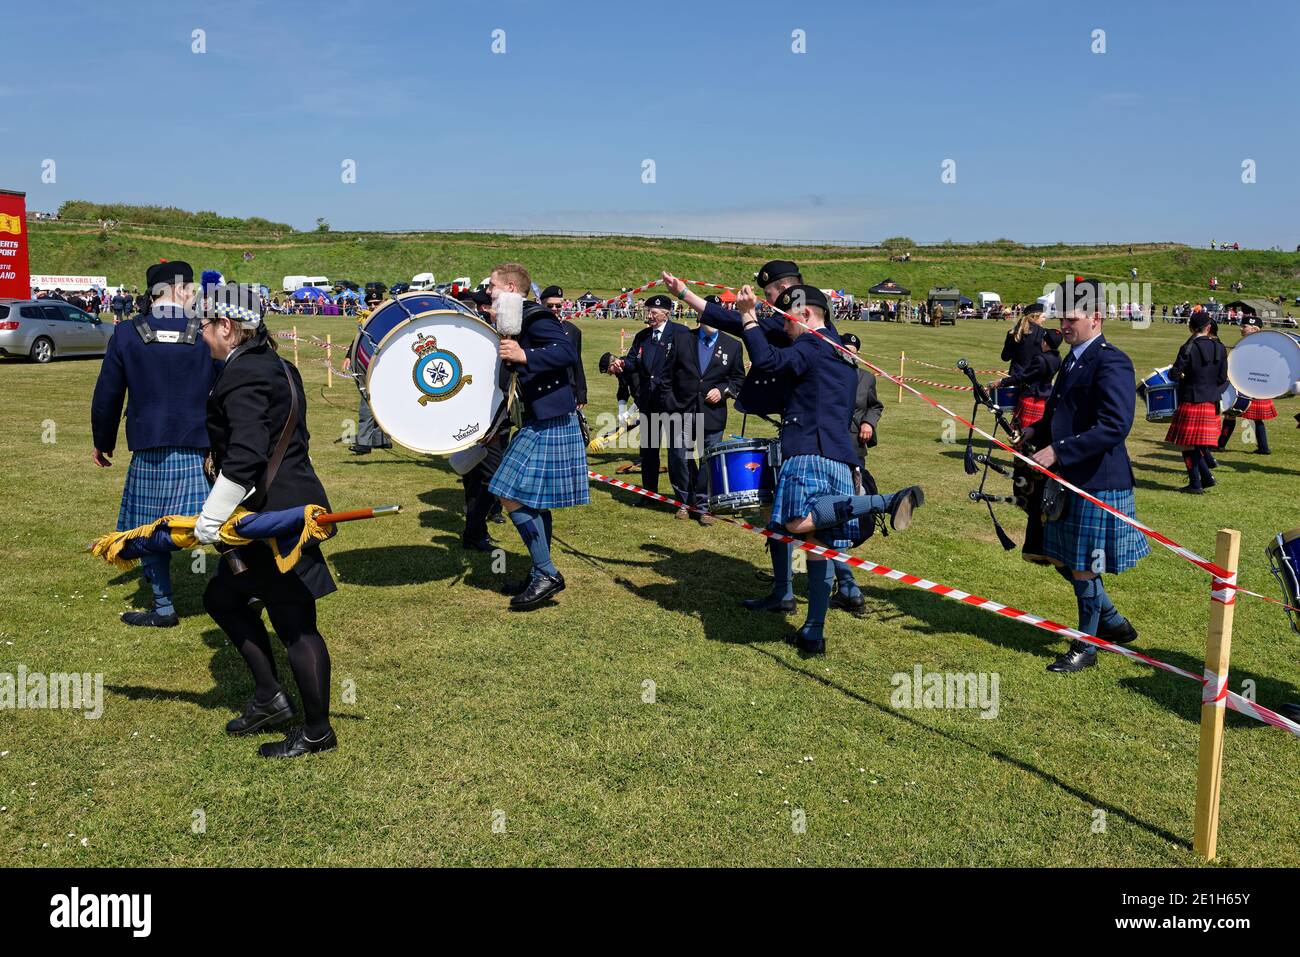 Members of a Marching Pipe band climbing over the temporary red and white tape barrier after their performance at an event in Arbroath. Stock Photo